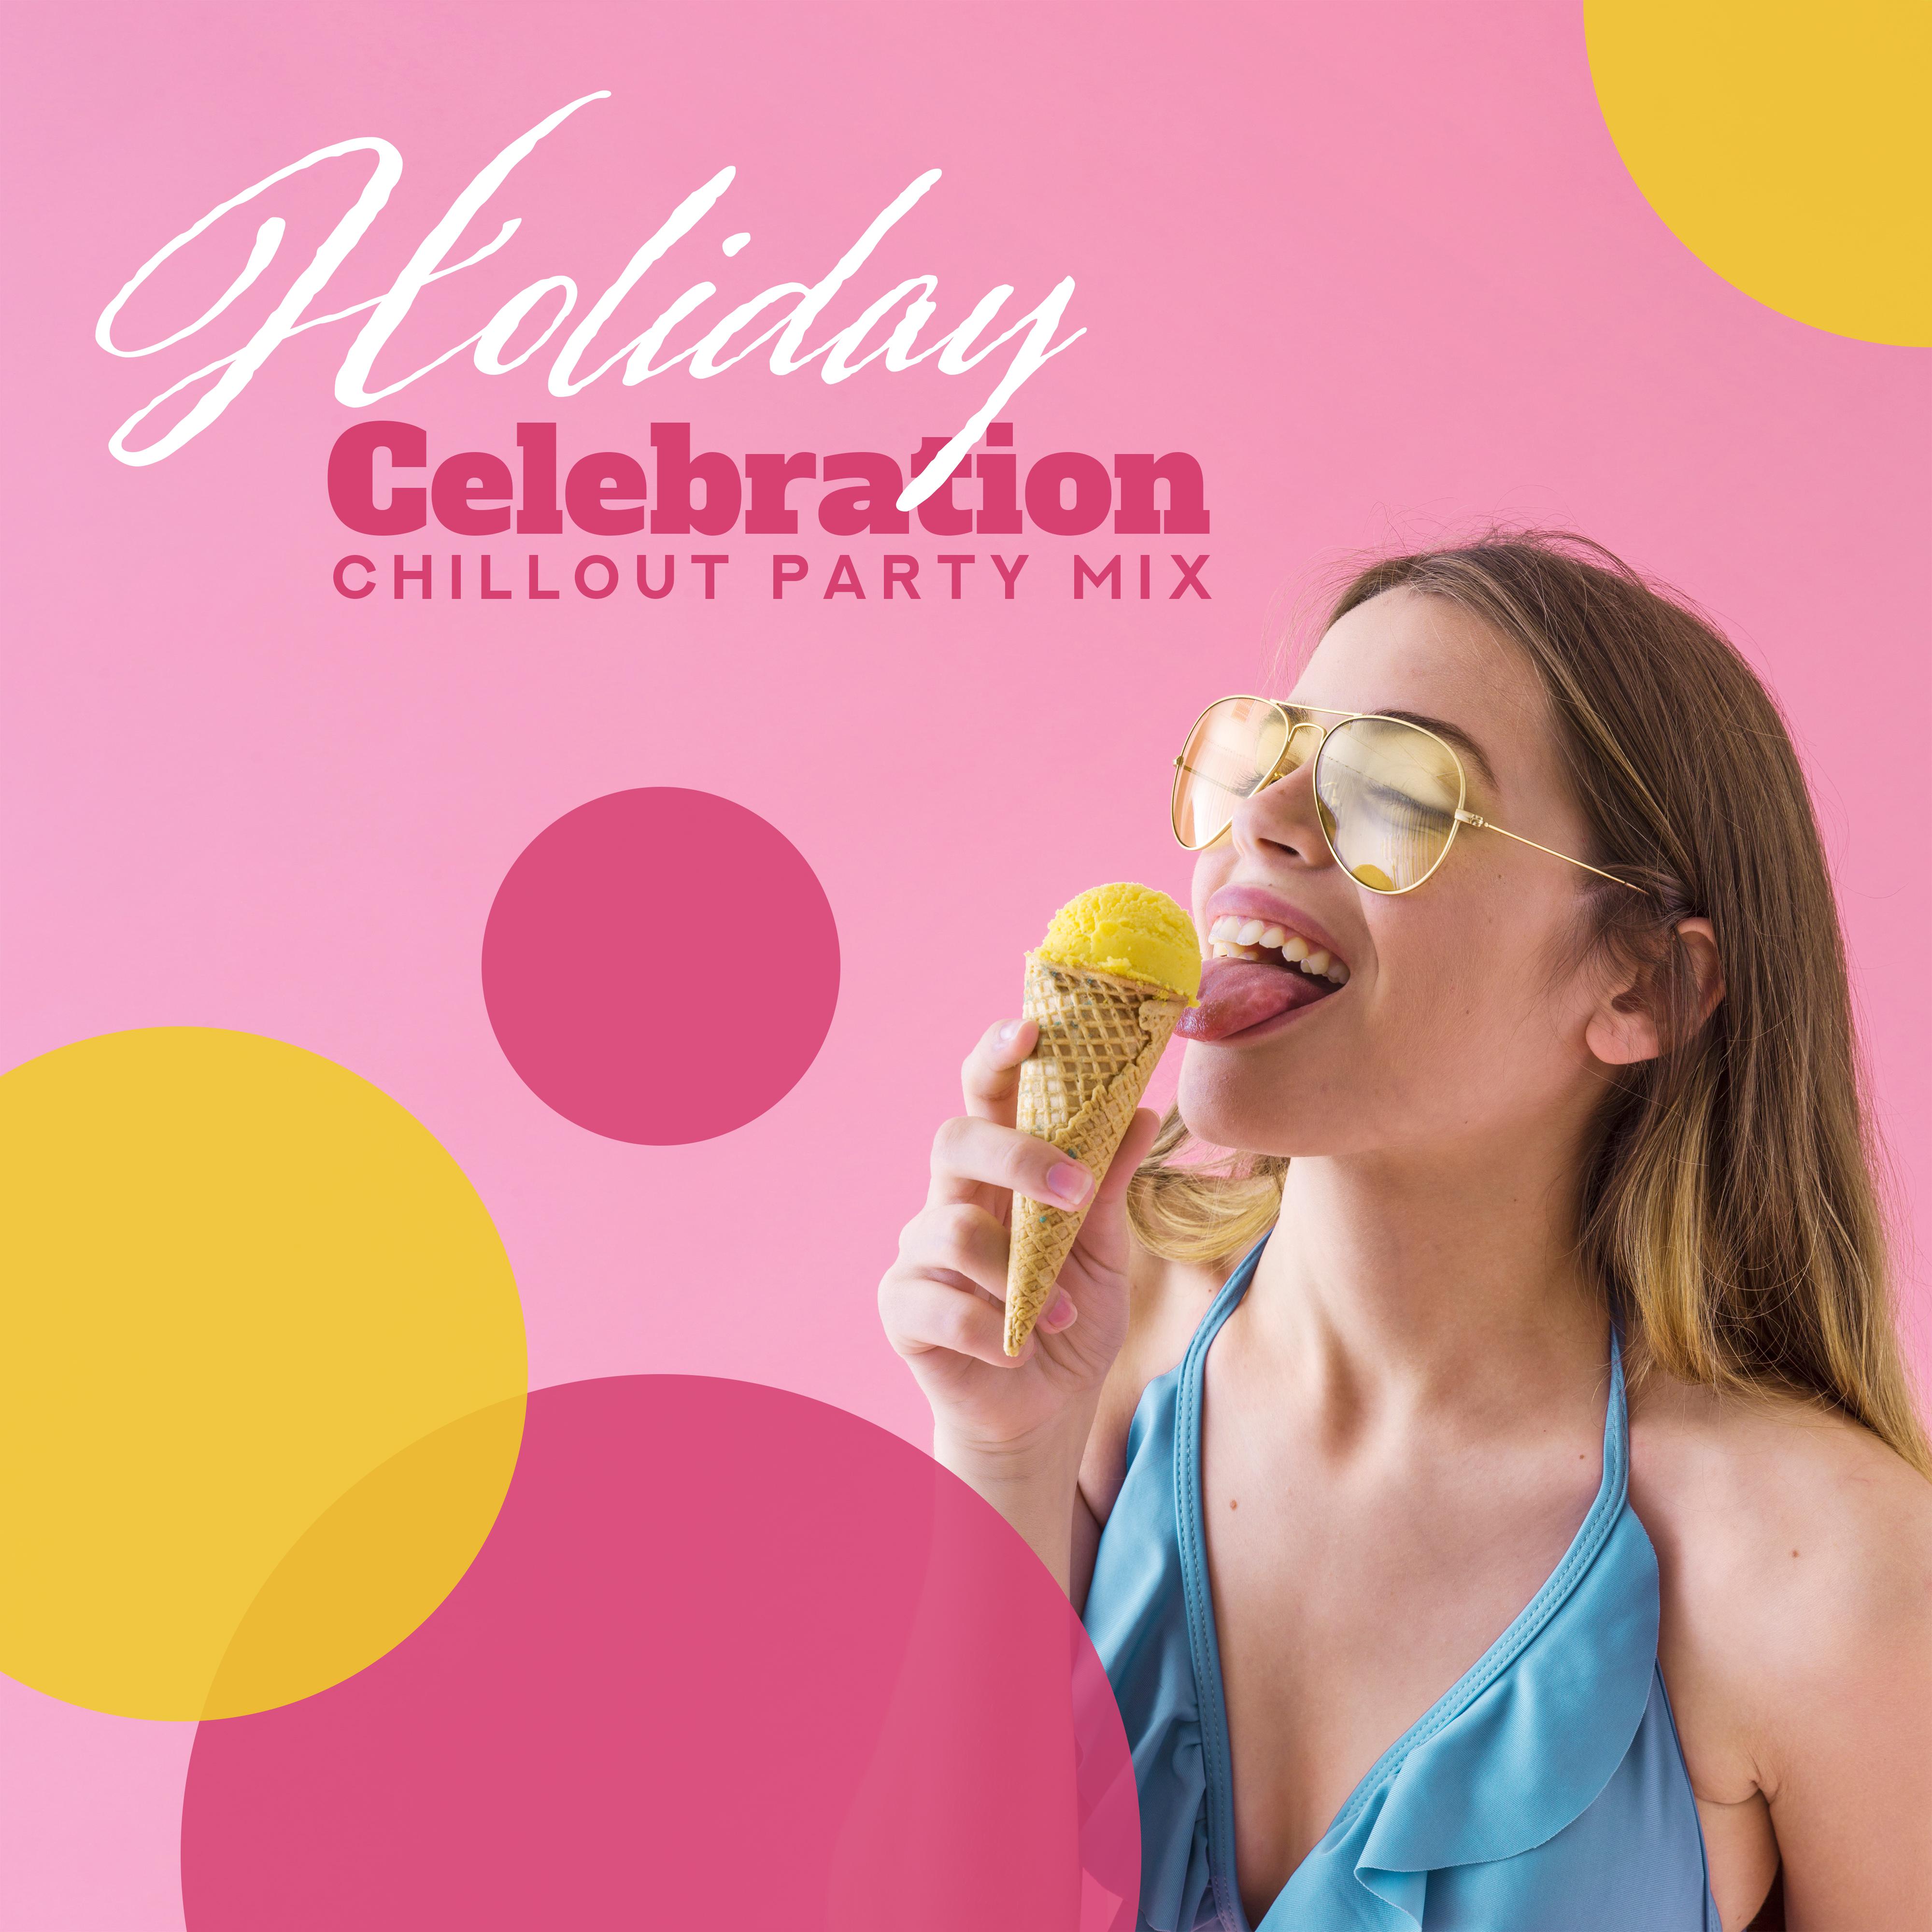 Holiday Celebration Chillout Party Mix: 2019 Chill Out Music, Dance Party Electronic Slow Beats, Tropical Vibes, Deep Bounce Lounge, Relaxing Songs